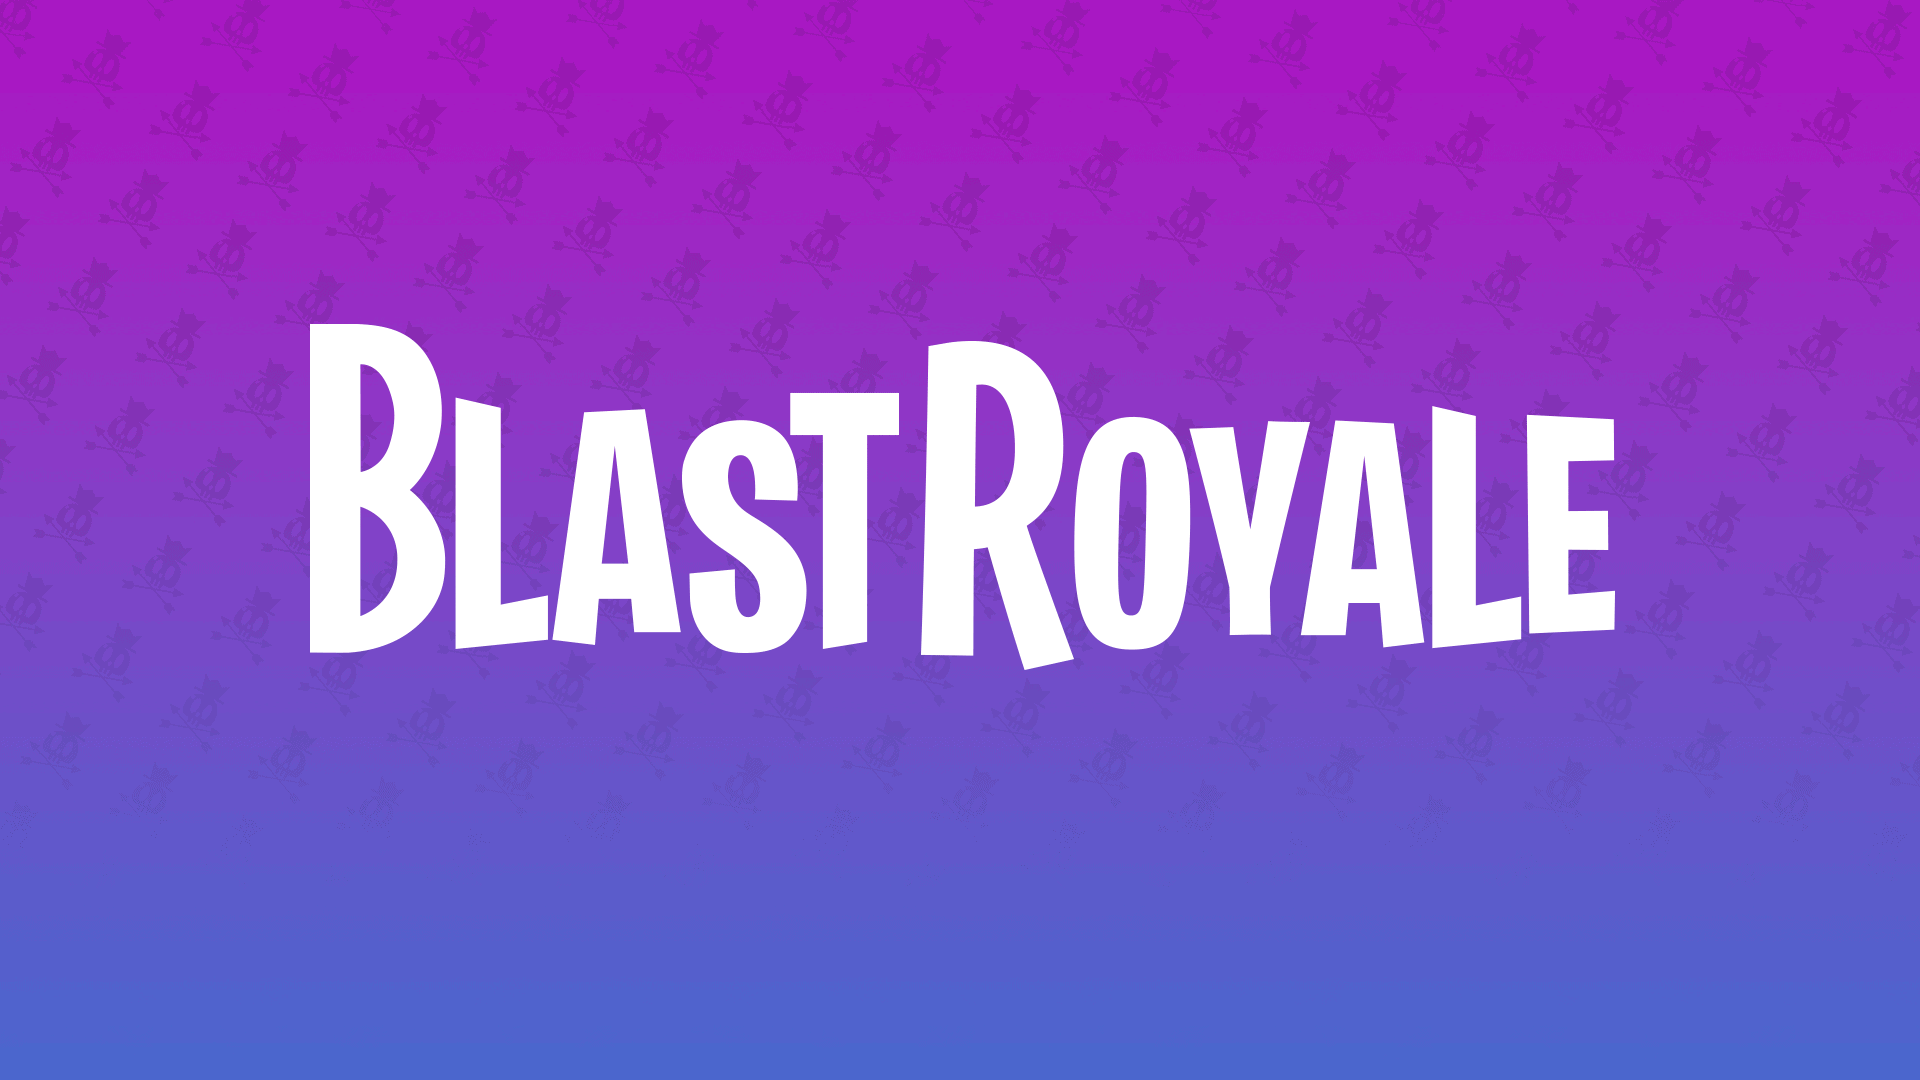 Blast Royale Raises M In Seed Round Backed by Animoca Brands & Mechanism Capital